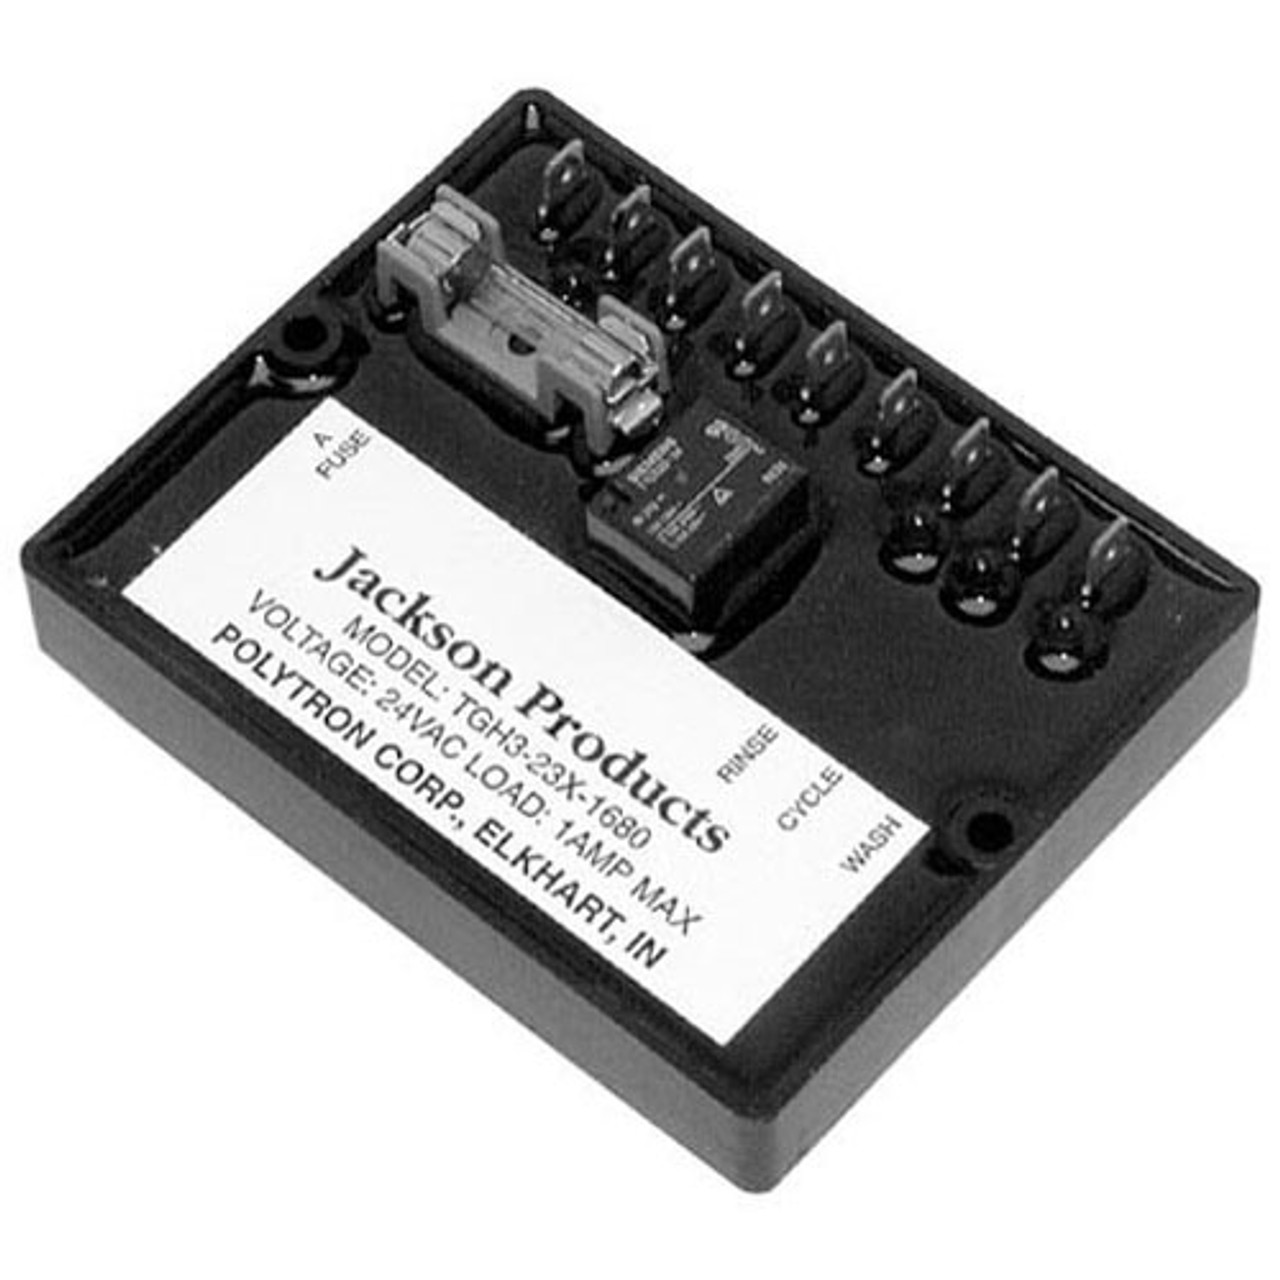 Jackson 5945-307-07-93 - Solid State Timer